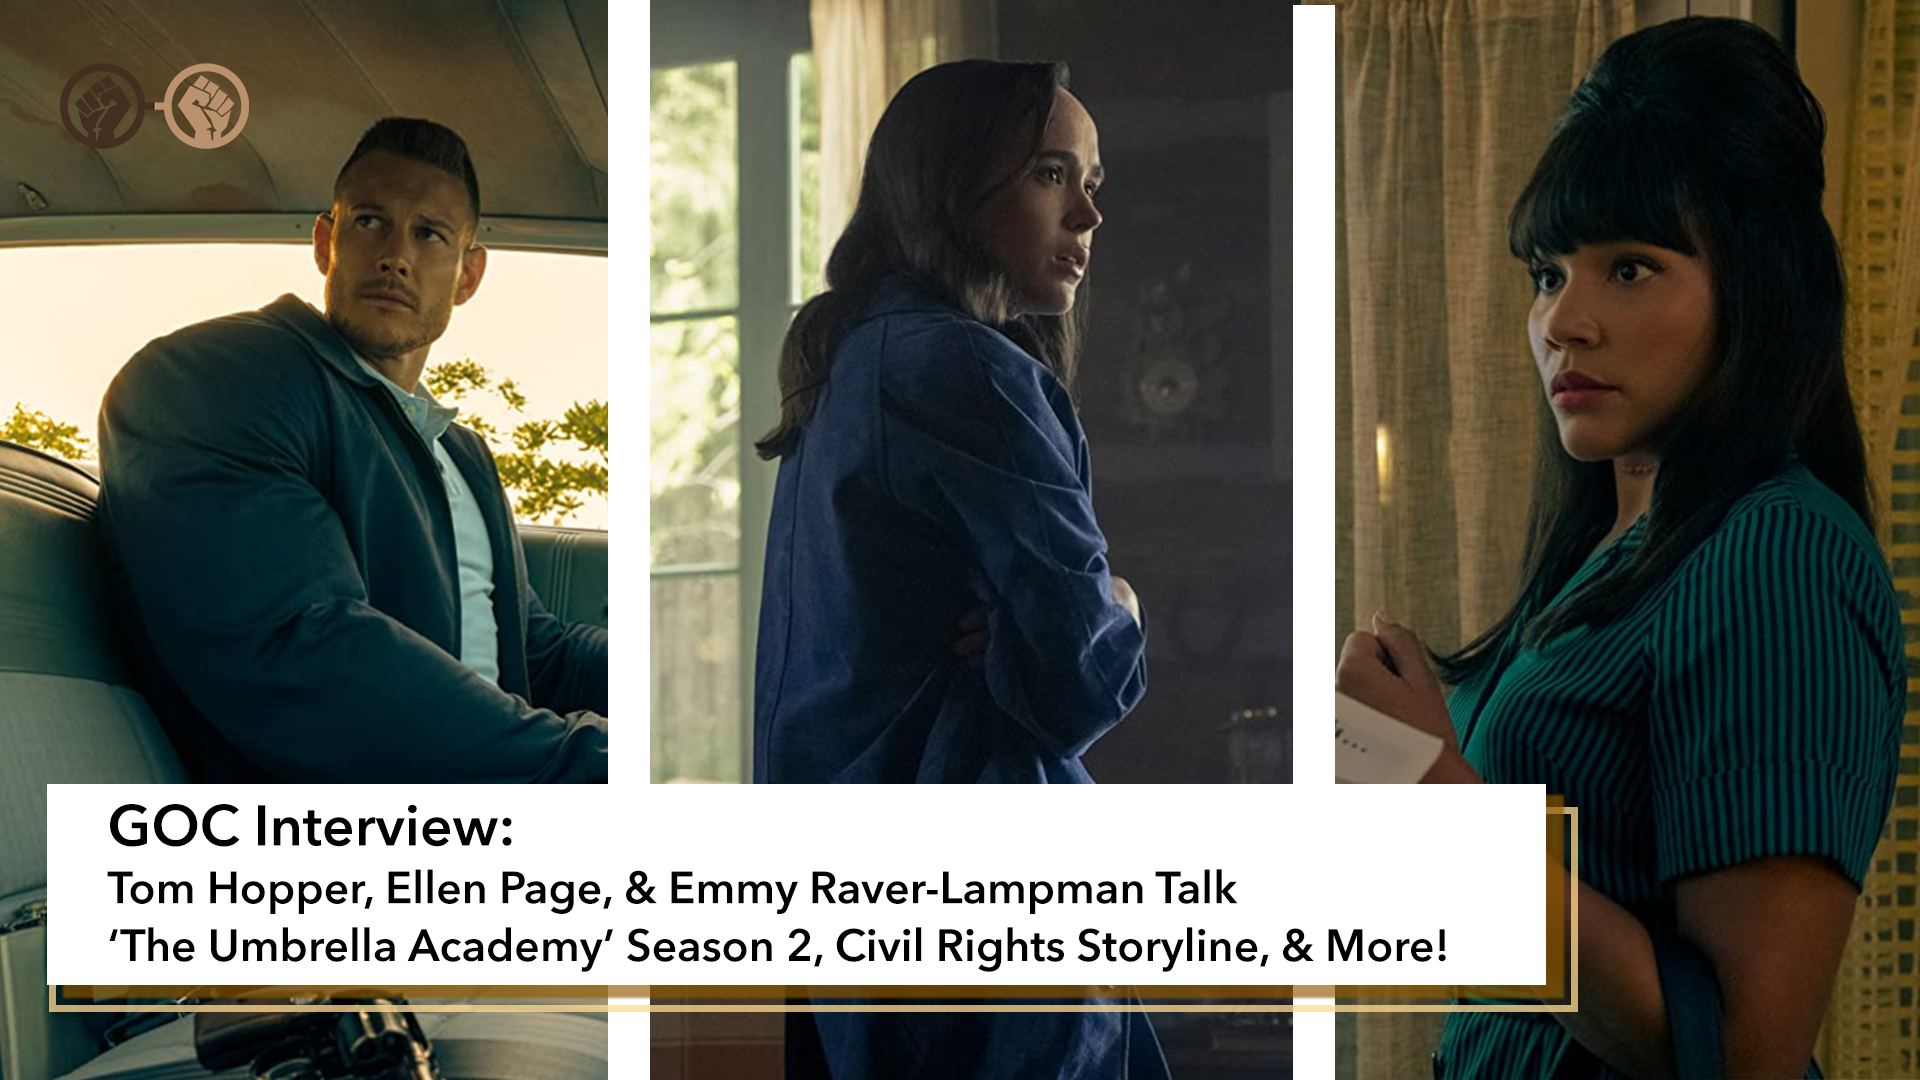 Interview: Tom Hopper, Ellen Page and Emmy Raver-Lampman Talk Season 2 of ‘The Umbrella Academy’, The Civil Rights Storyline & More